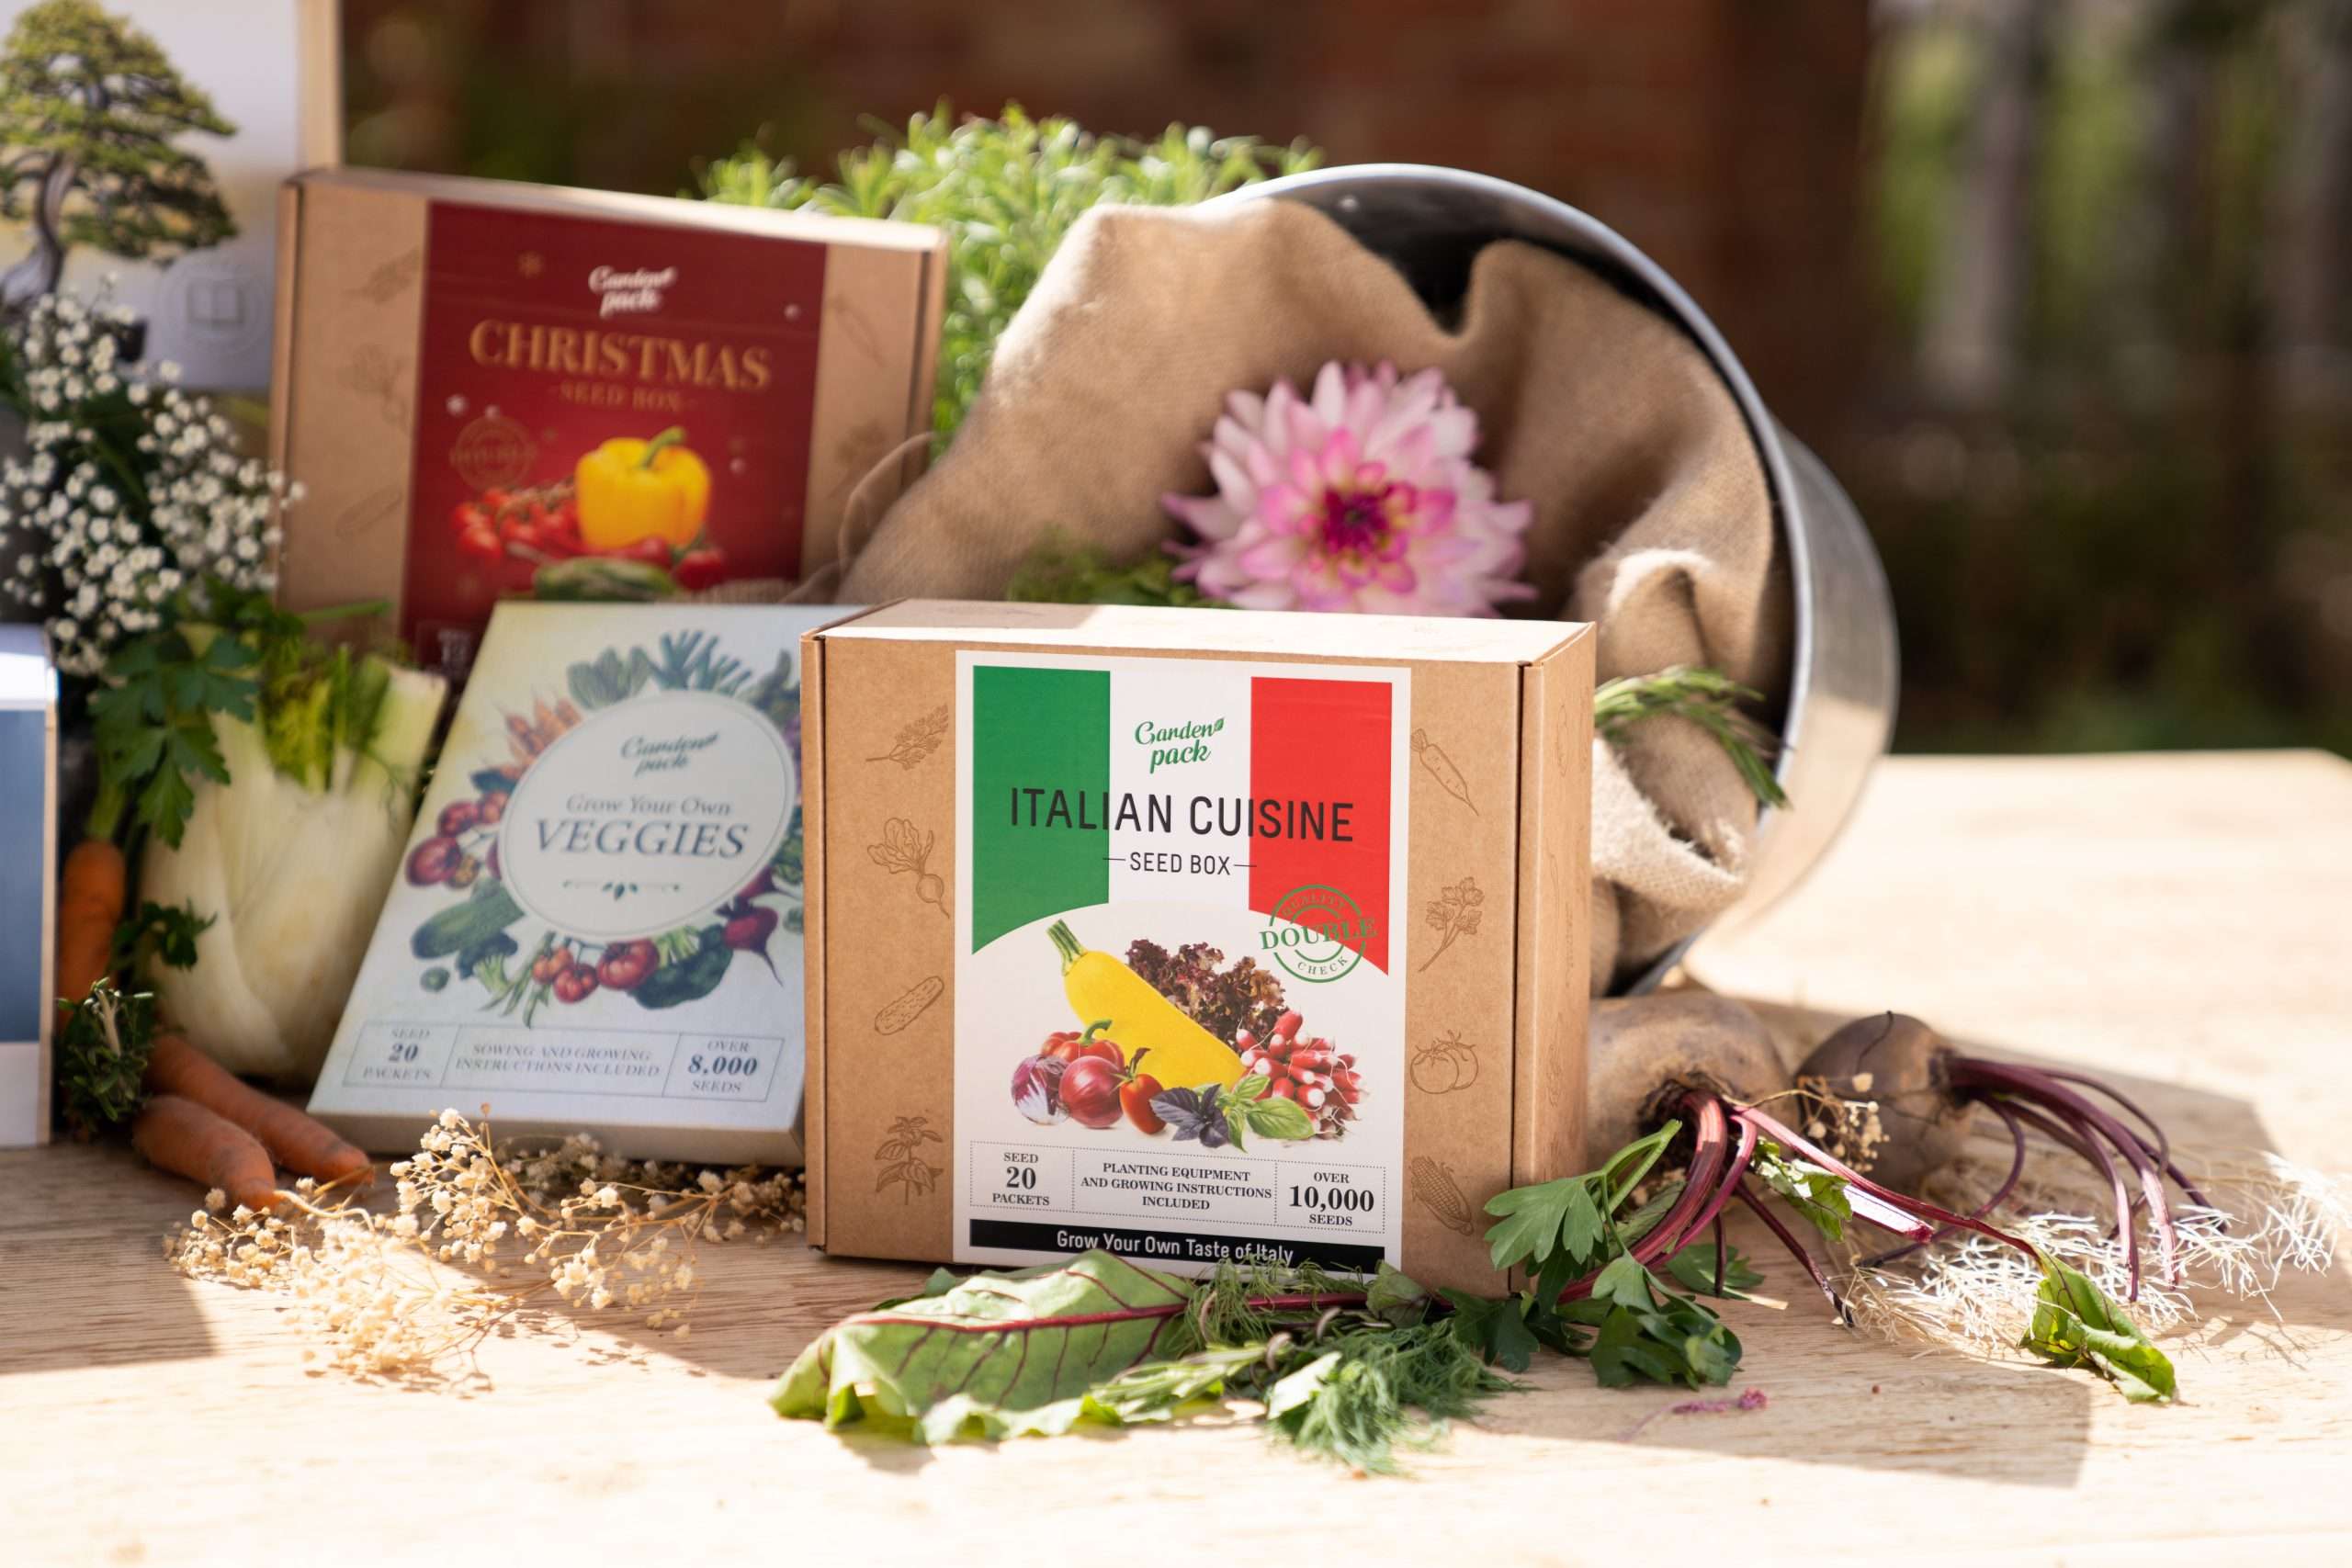 GAR2951 GardenPack 3 1 scaled GROW YOUR SEED COLLECTION of 20 most popular Italian ingredient varieties in one seed starter kit features veggies and culinary herb seeds no Italian dish can do without!   <strong>What's included:</strong> <ul> <li>20 of the most popular Italian ingredient varieties: Basil, Parsley, Oregano, Thyme, Marjoram, and more!</li> <li>2 high quality rubber Gardening Gloves with Claws;</li> <li>6 Biodegradable Peat Pots & 6 Bamboo Plant Markers</li> <li>Easy to follow growing guide;</li> <li>Low Shipping rates;</li> </ul>   <strong><span data-preserver-spaces="true">OUR BEST VALUE GARDENING KIT</span></strong><span data-preserver-spaces="true"> to save money, reduce your carbon footprint & celebrate the natural powers of plants with your vegetable plants & seeds.</span>  